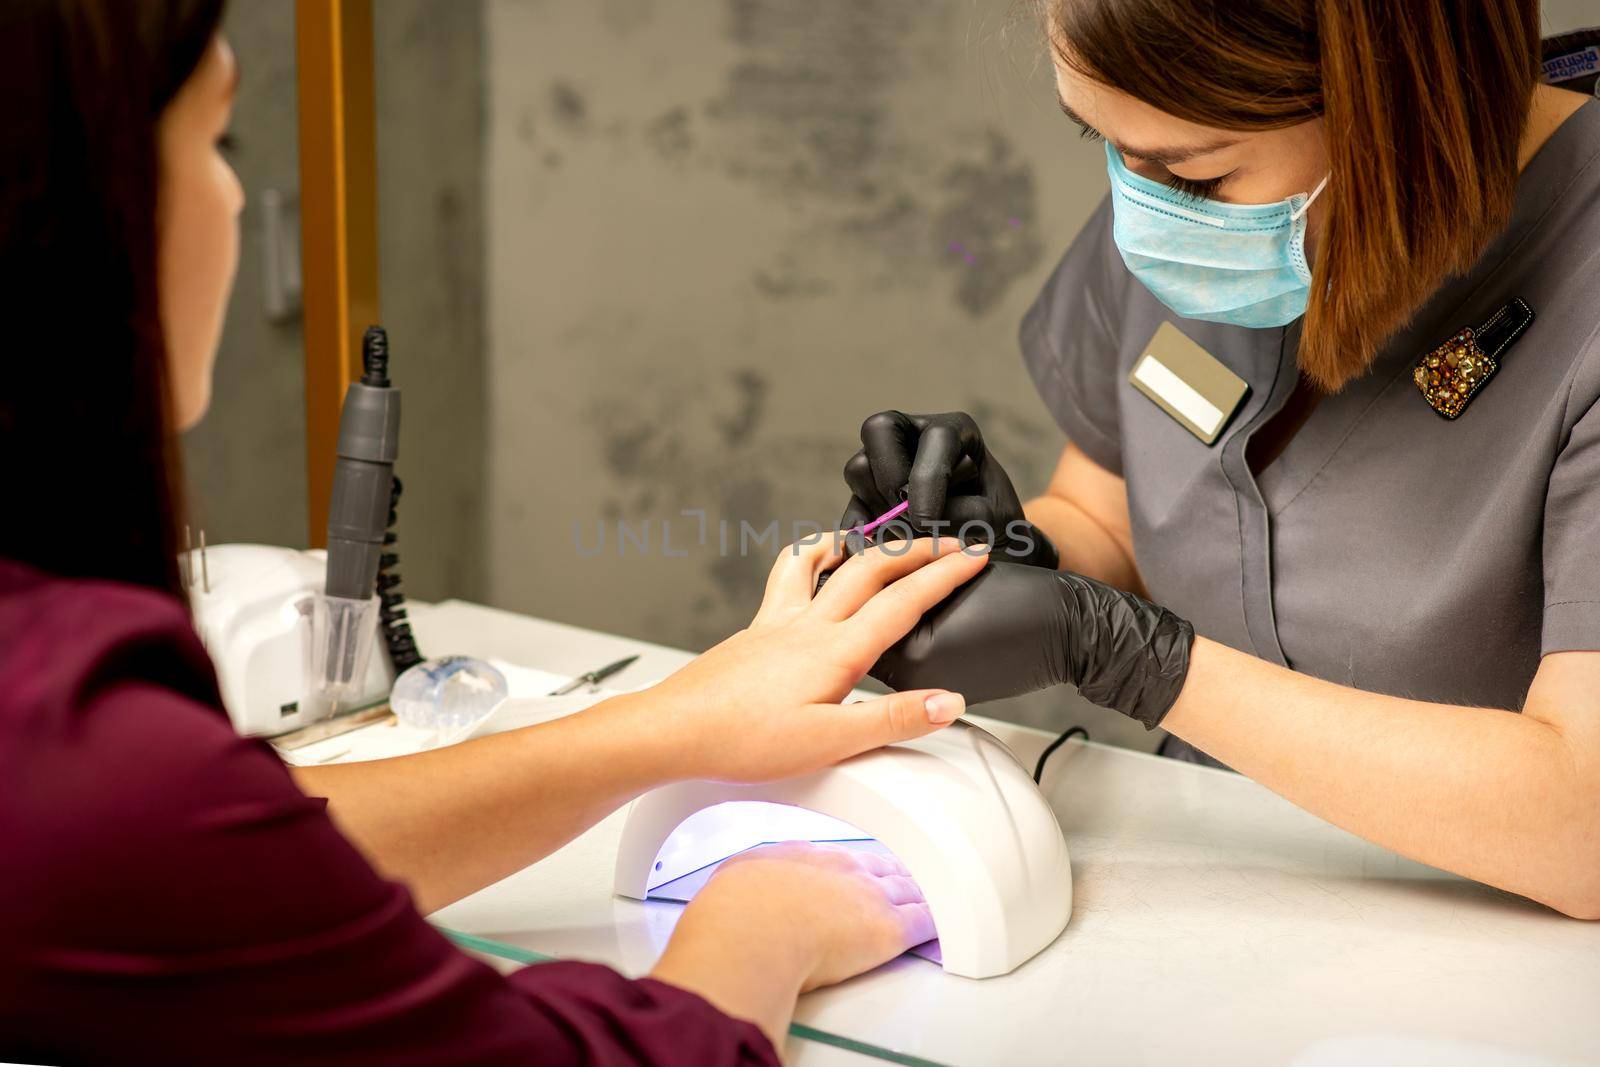 Professional manicure. A manicurist is painting the female nails of a client with purple nail polish in a beauty salon, close up. Beauty industry concept